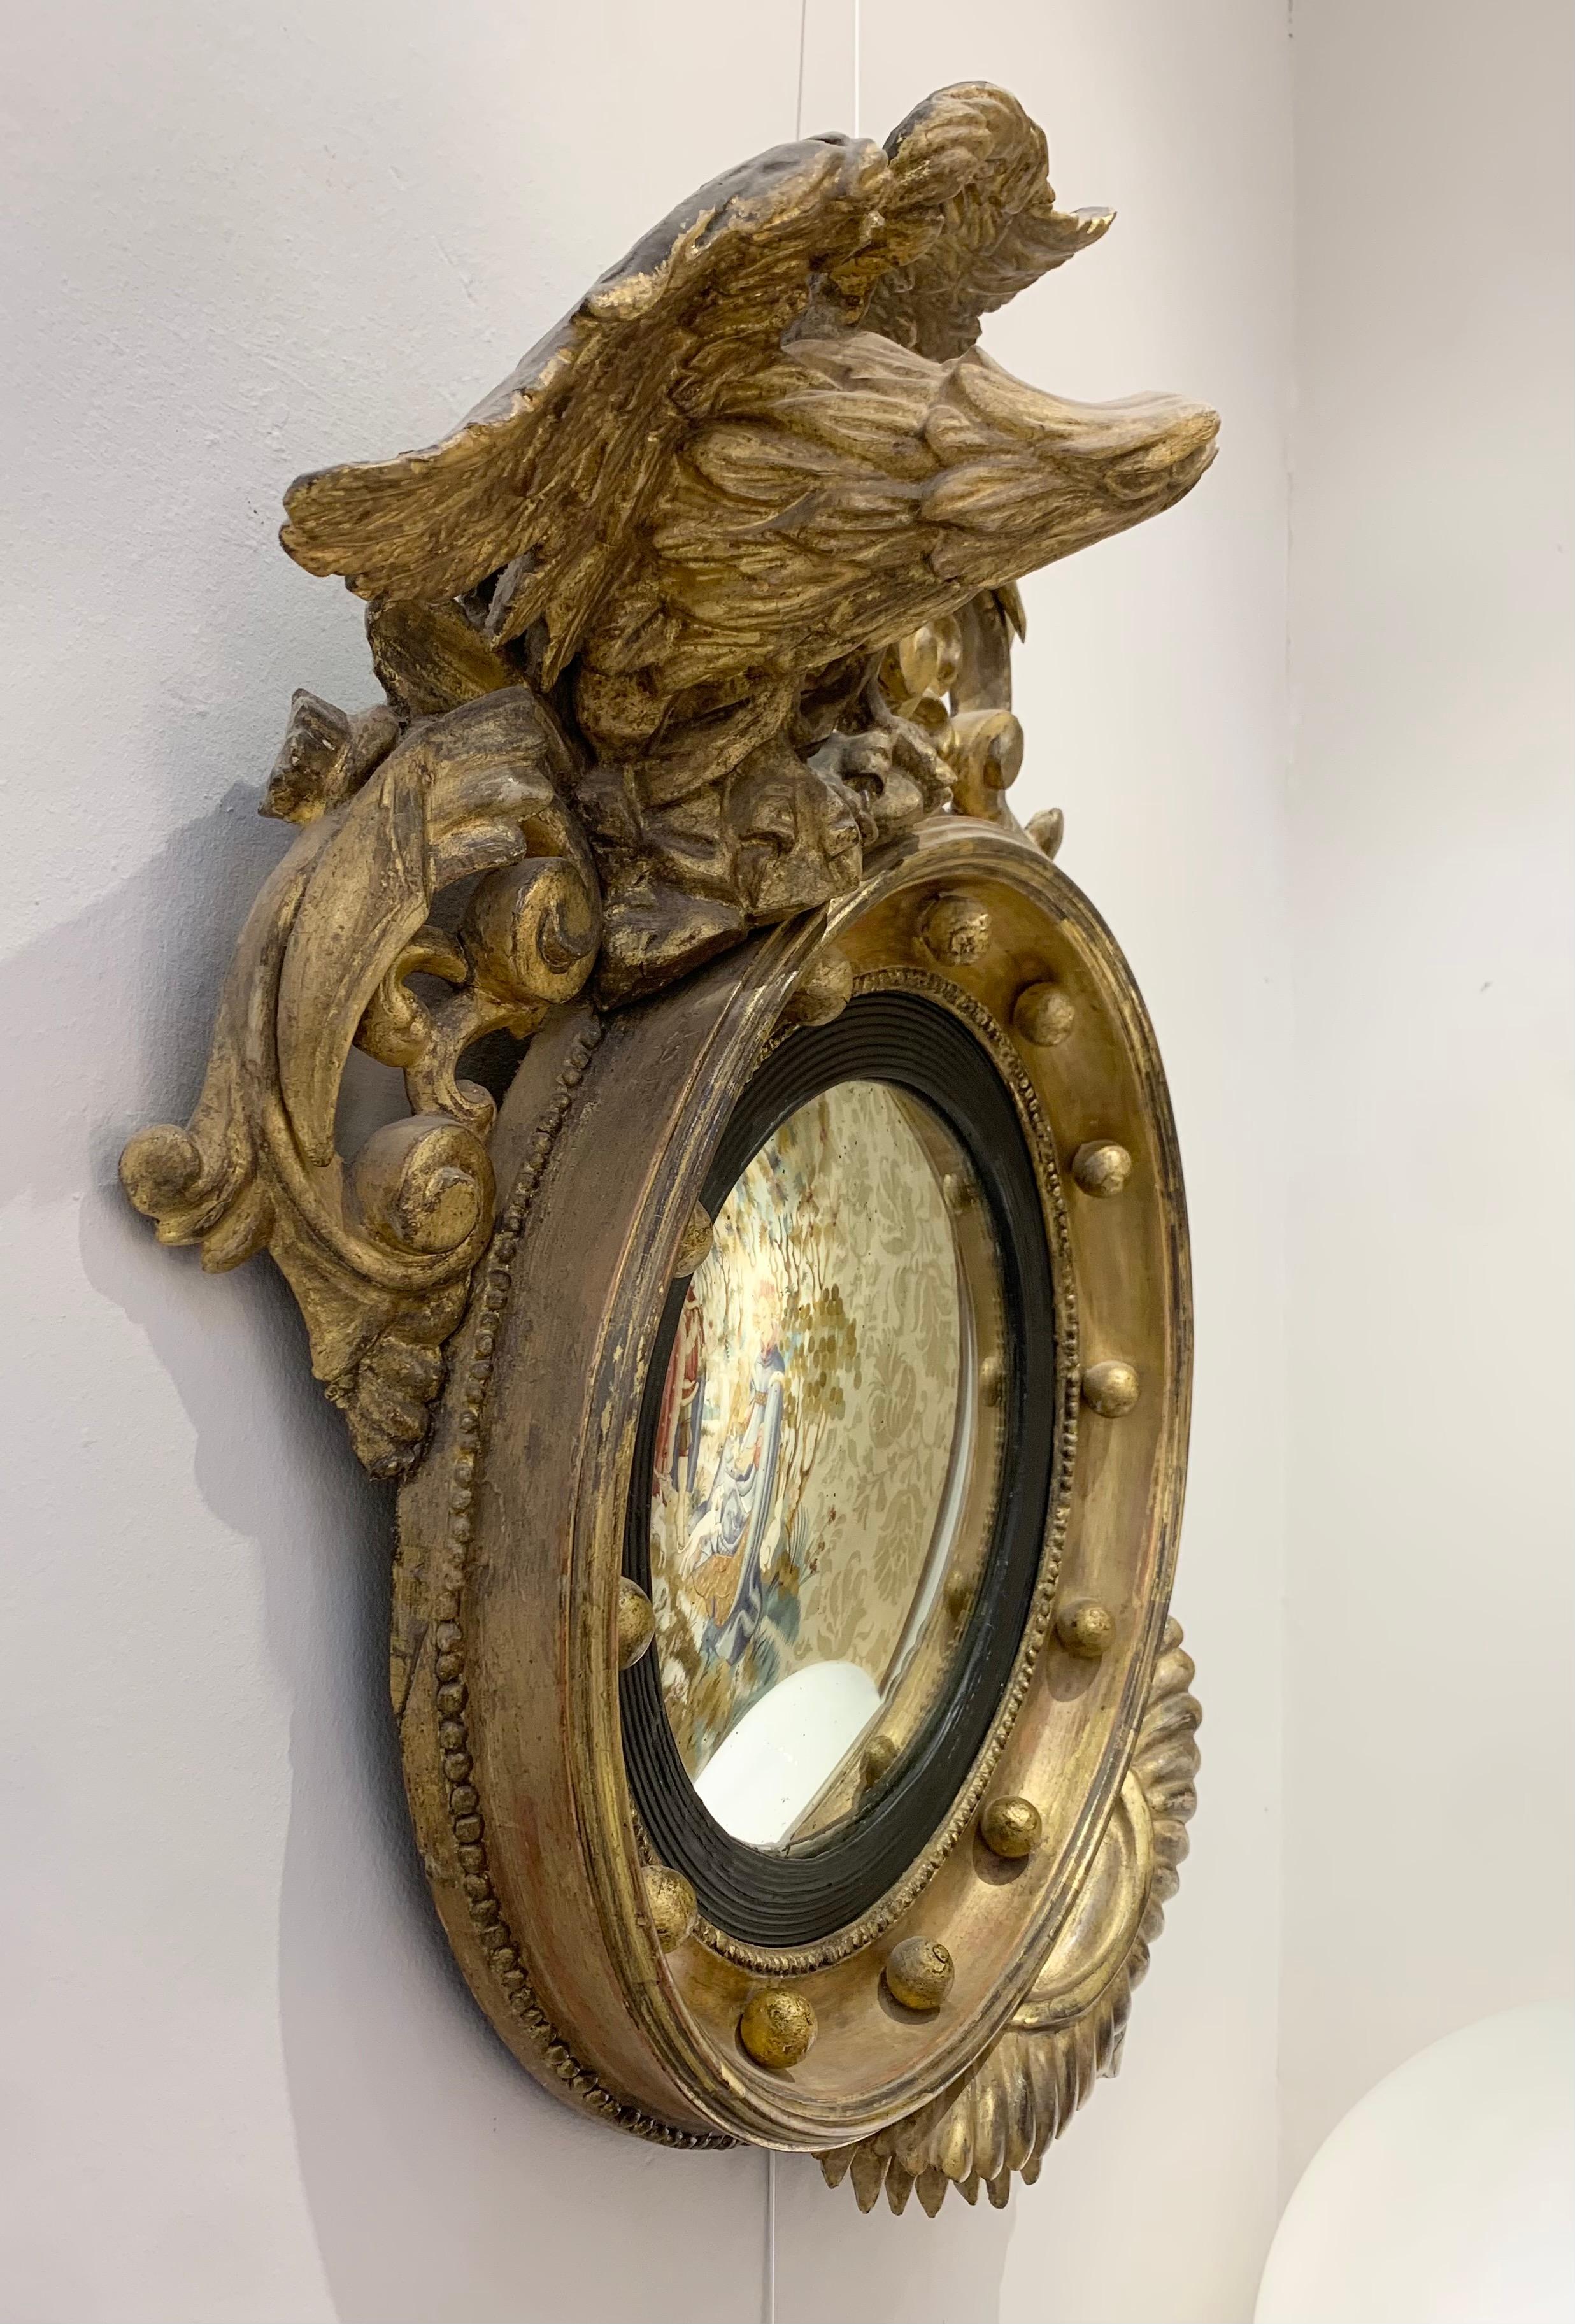 19th Century Gilded sculpted wood eagle convex mirror - c.19th century